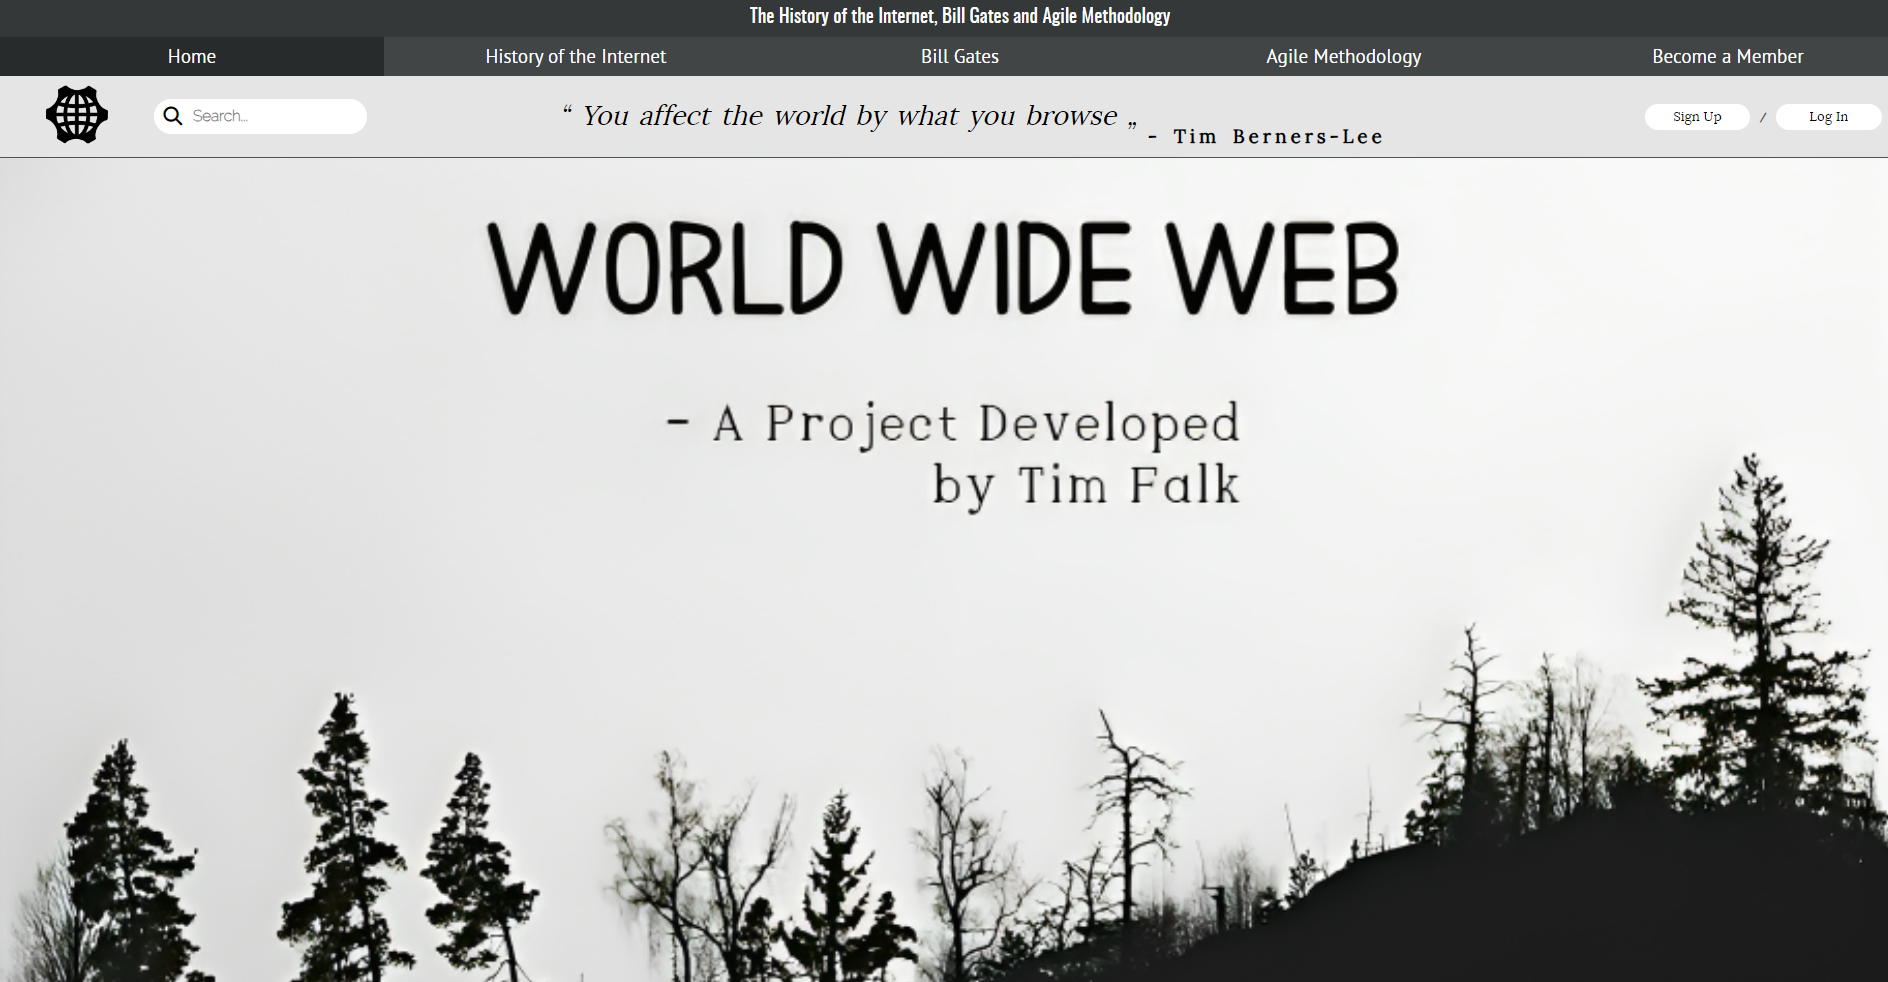 Picture of a world wide web history websites homepage.